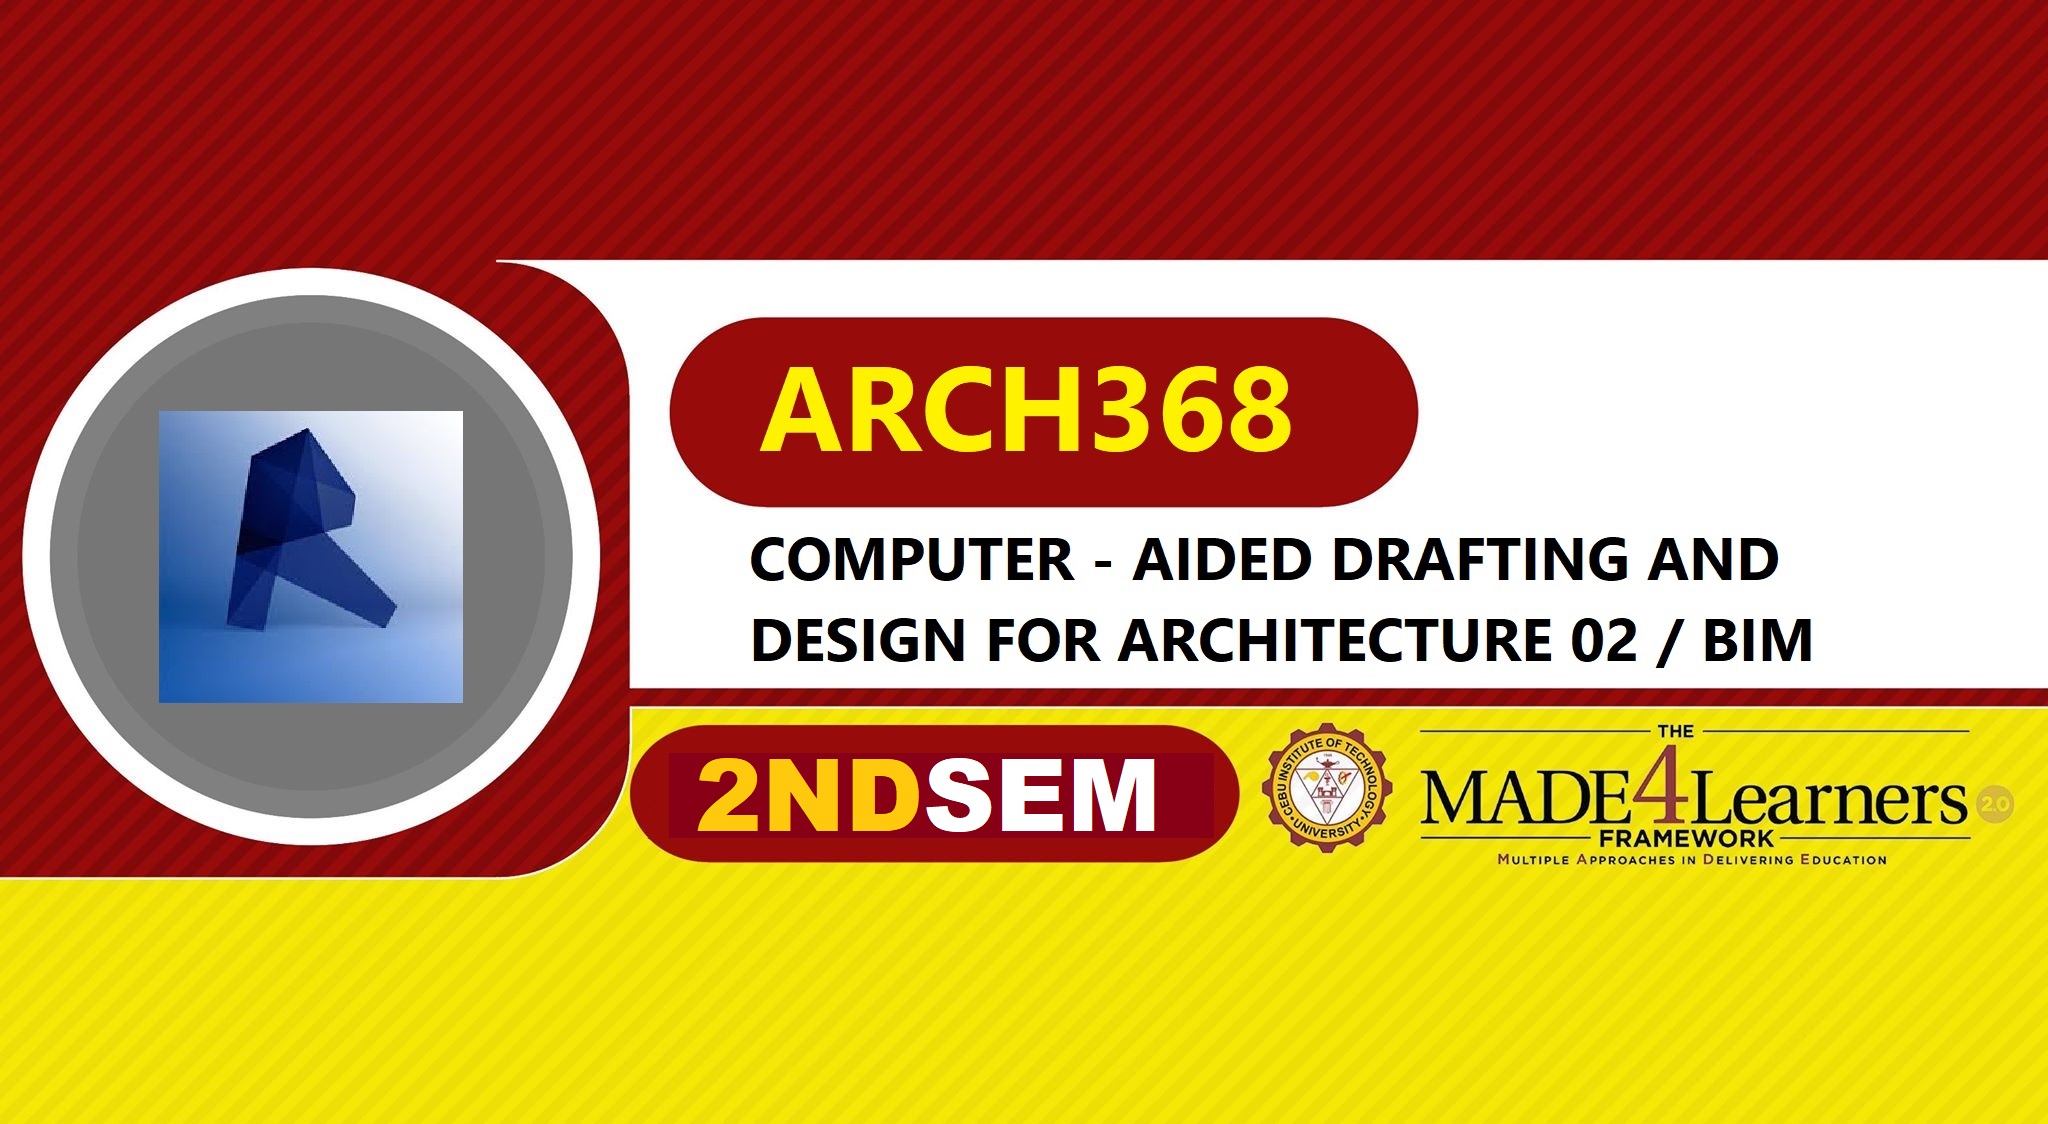 ARCH368: COMPUTER AIDED DESIGN AND DRAFTING FOR ARCHITECTURE 2 / BIM